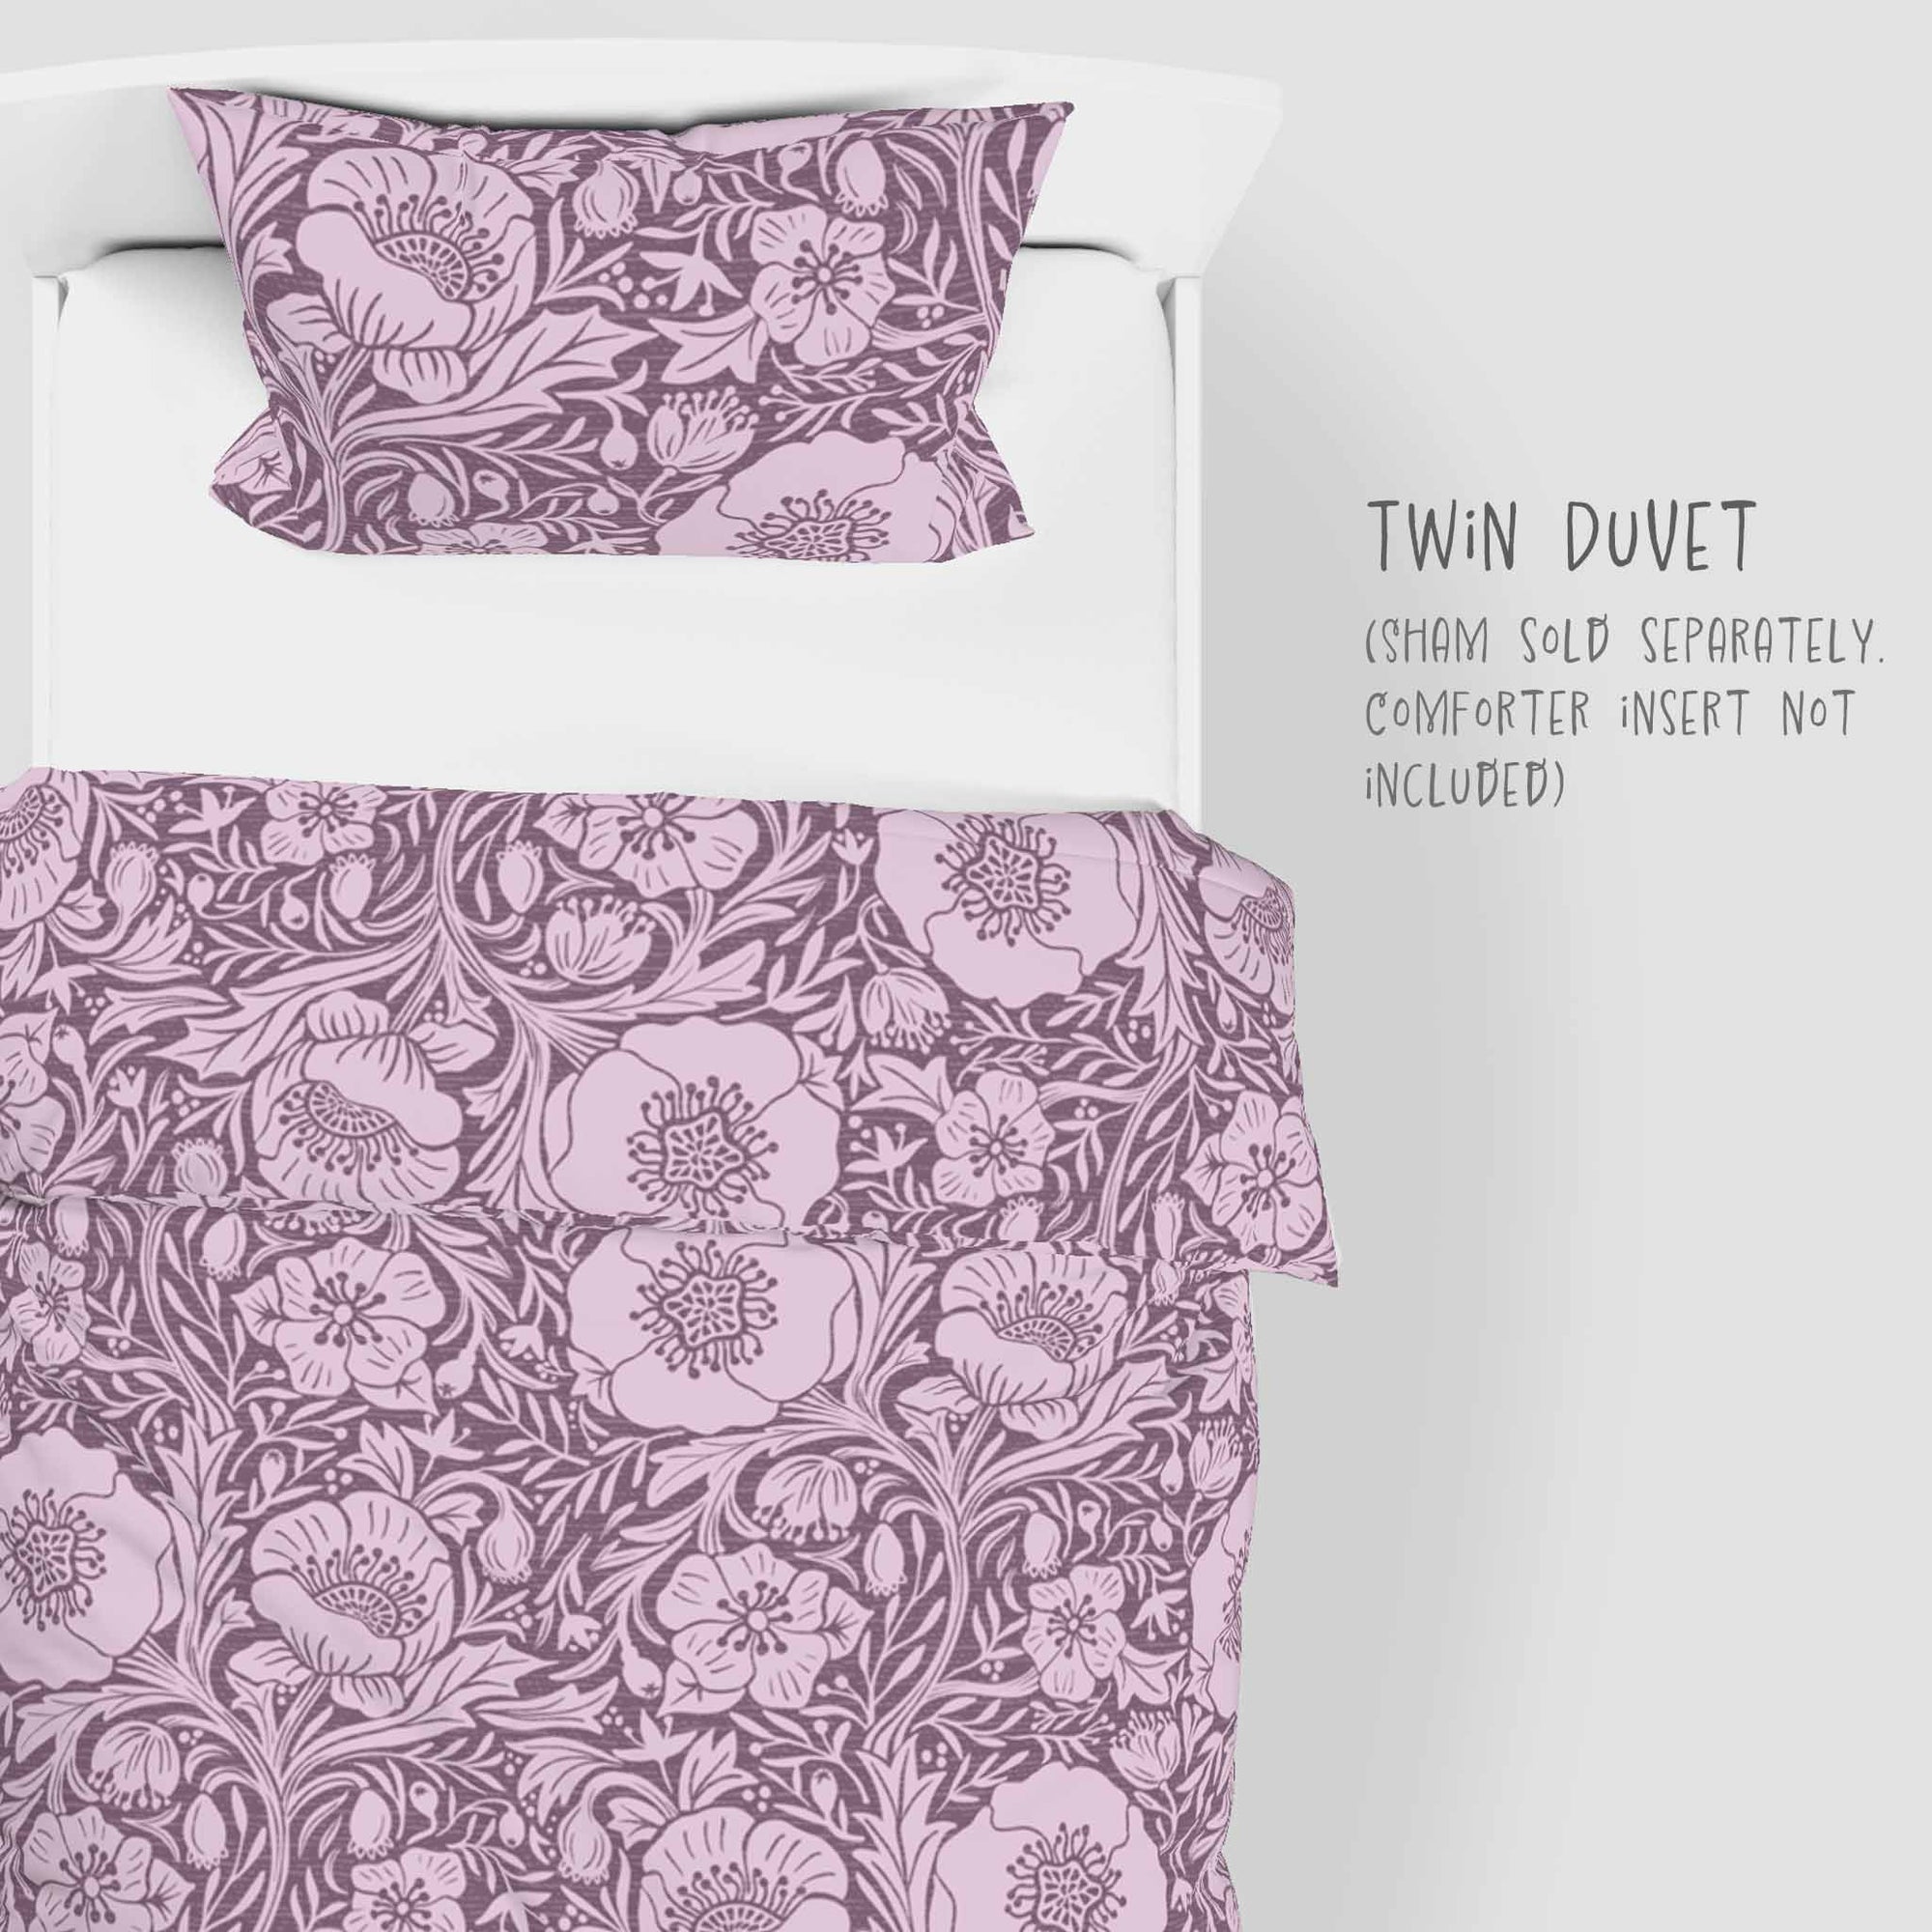 Poppies on purple background 100% Cotton Duvet Cover: Twin and Twin XL sizes.